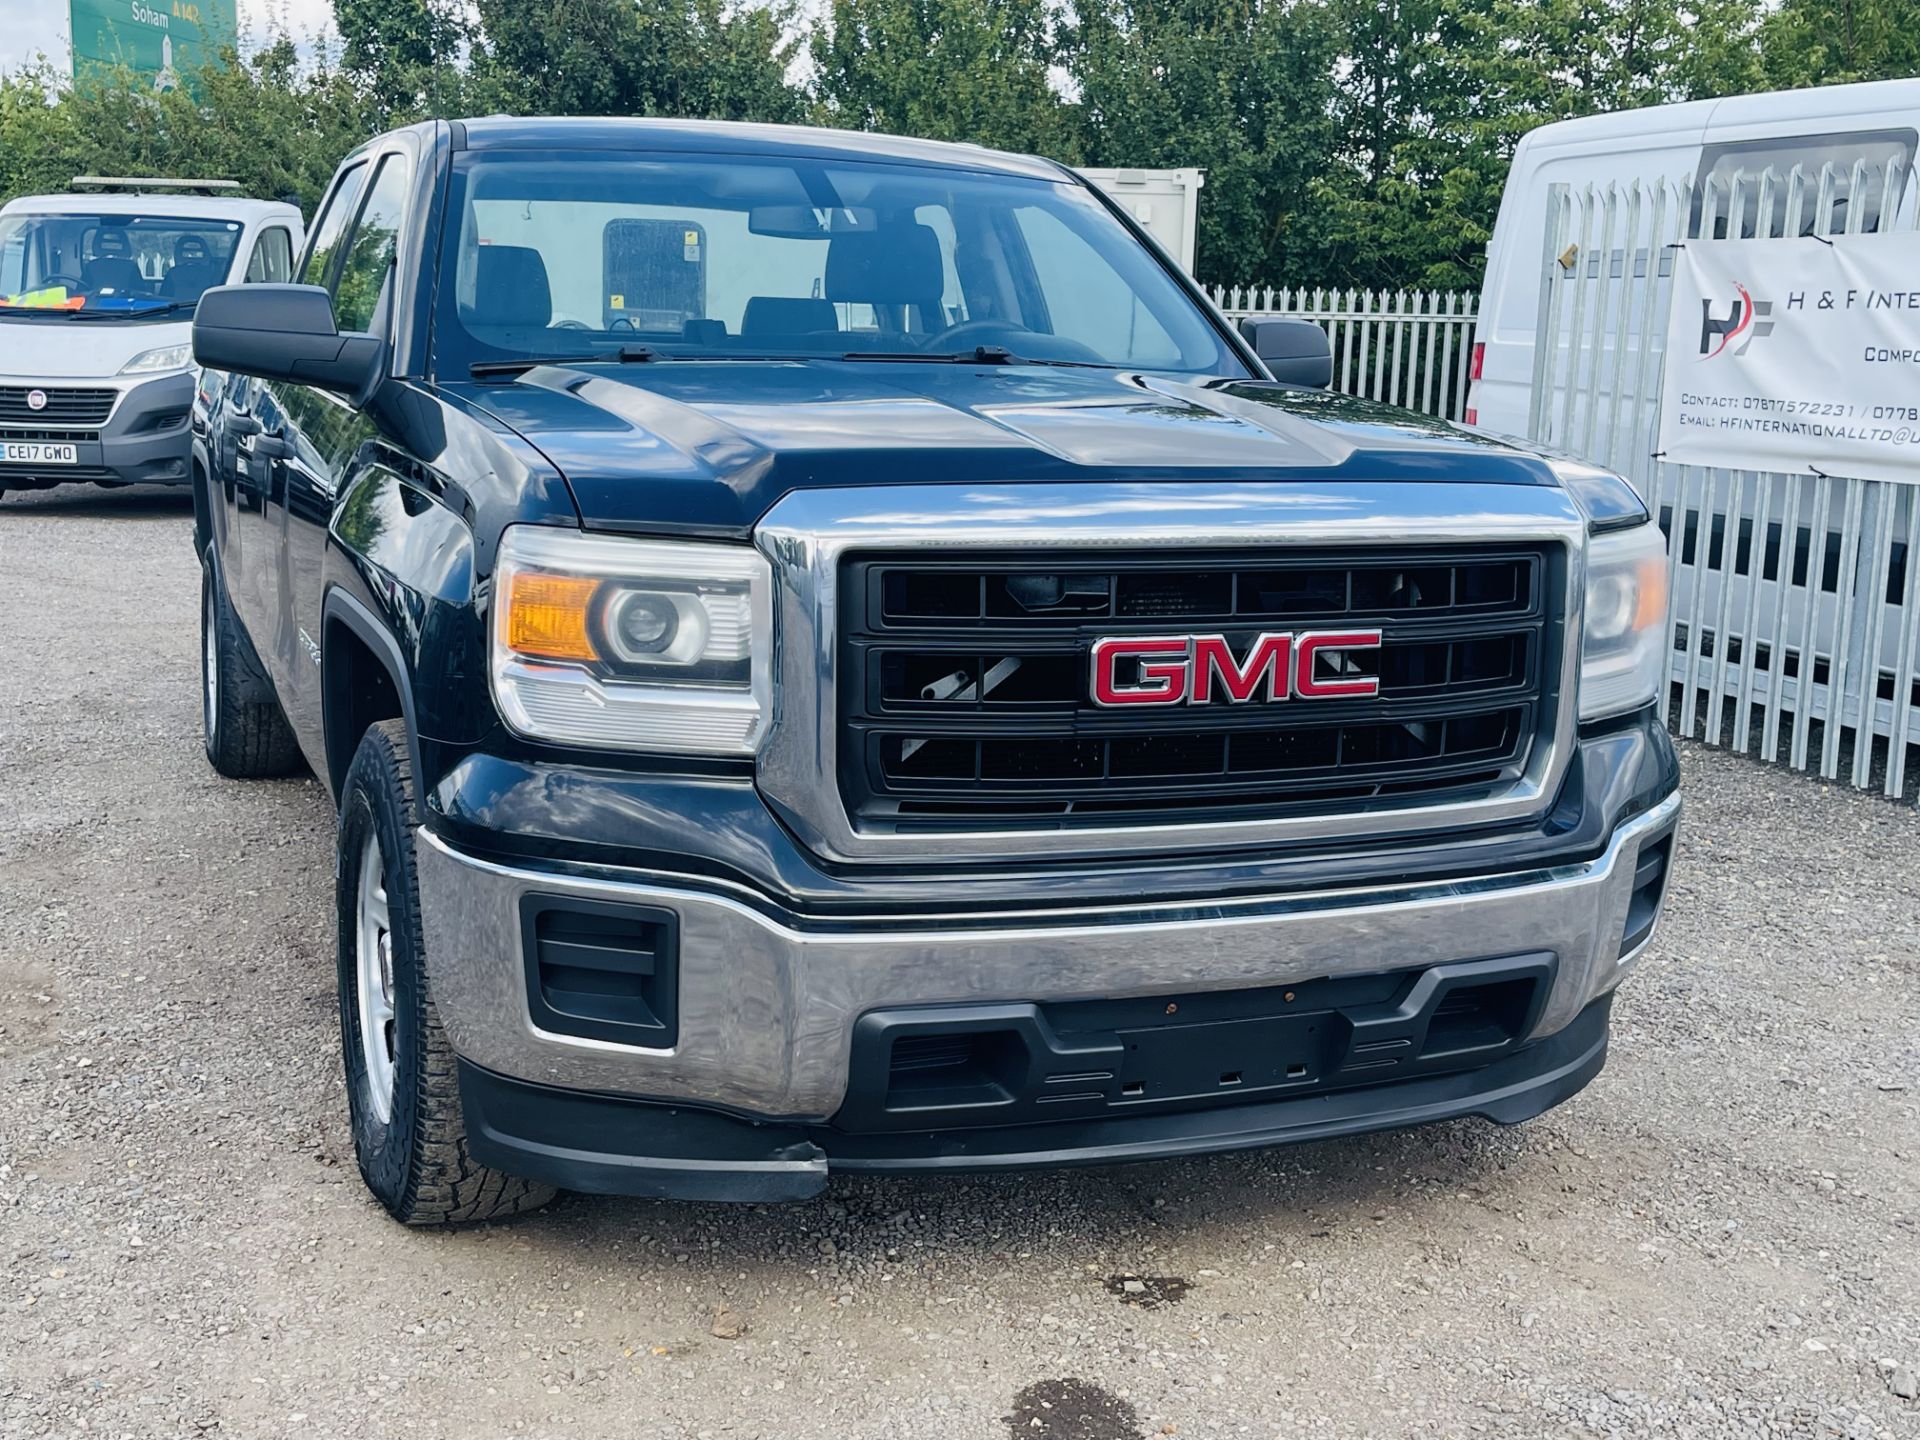 ** ON SALE ** GMC Sierra 4.3L V6 1500 Double-Cab 2014 '2014 Year' 6 seats - Air Con - Pick-up - - Image 2 of 22